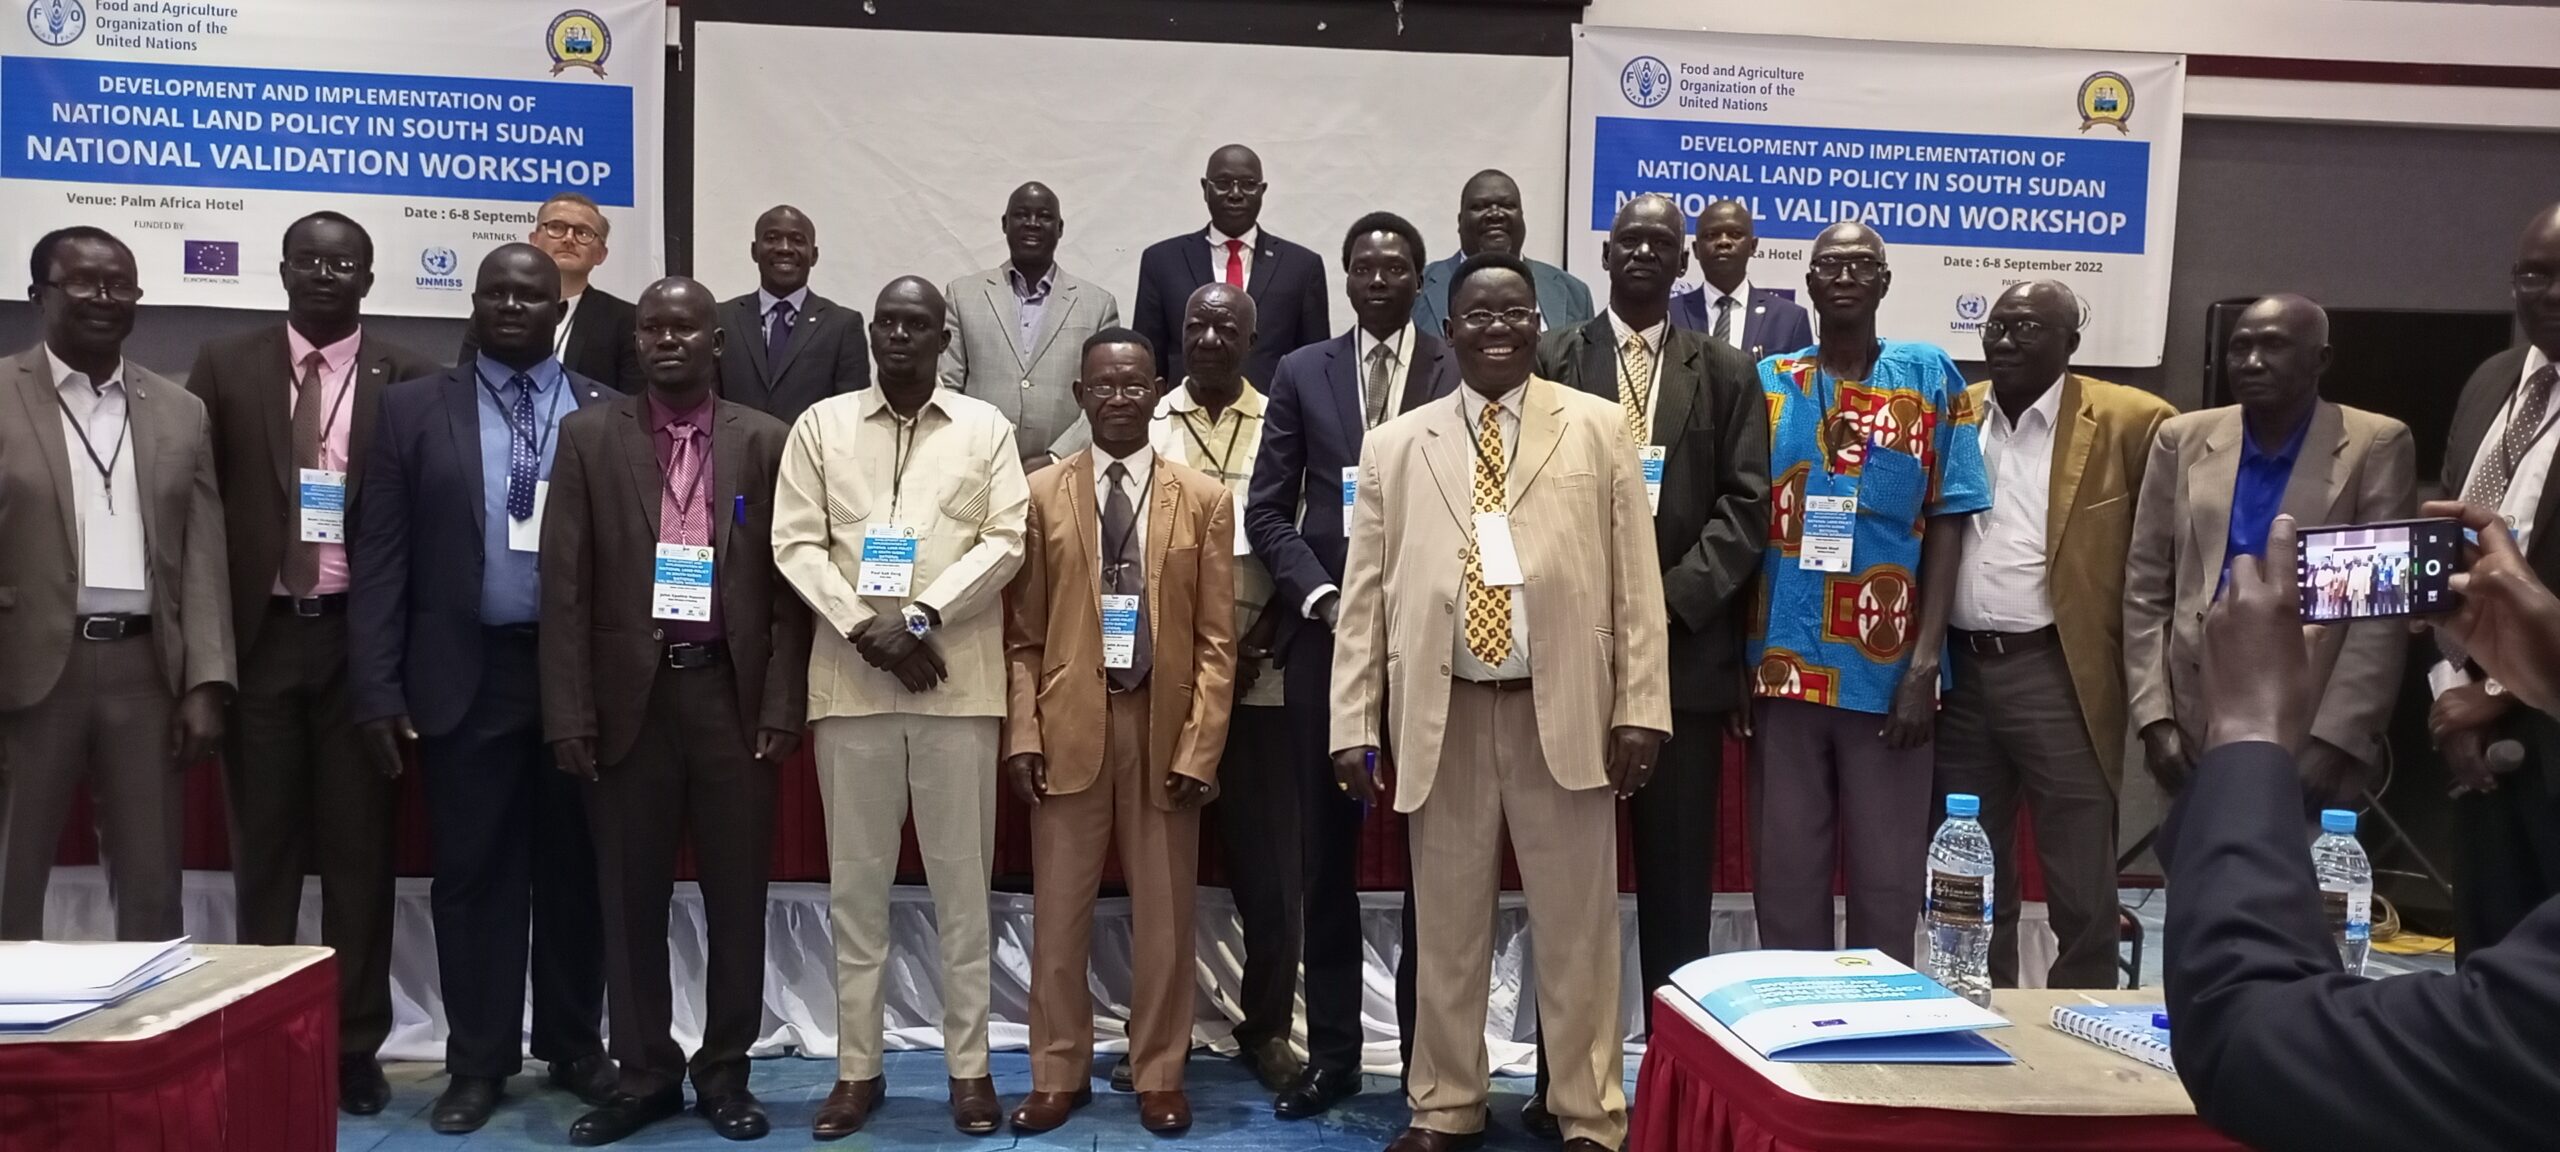 Stakeholders conduct land policy review workshop in Juba